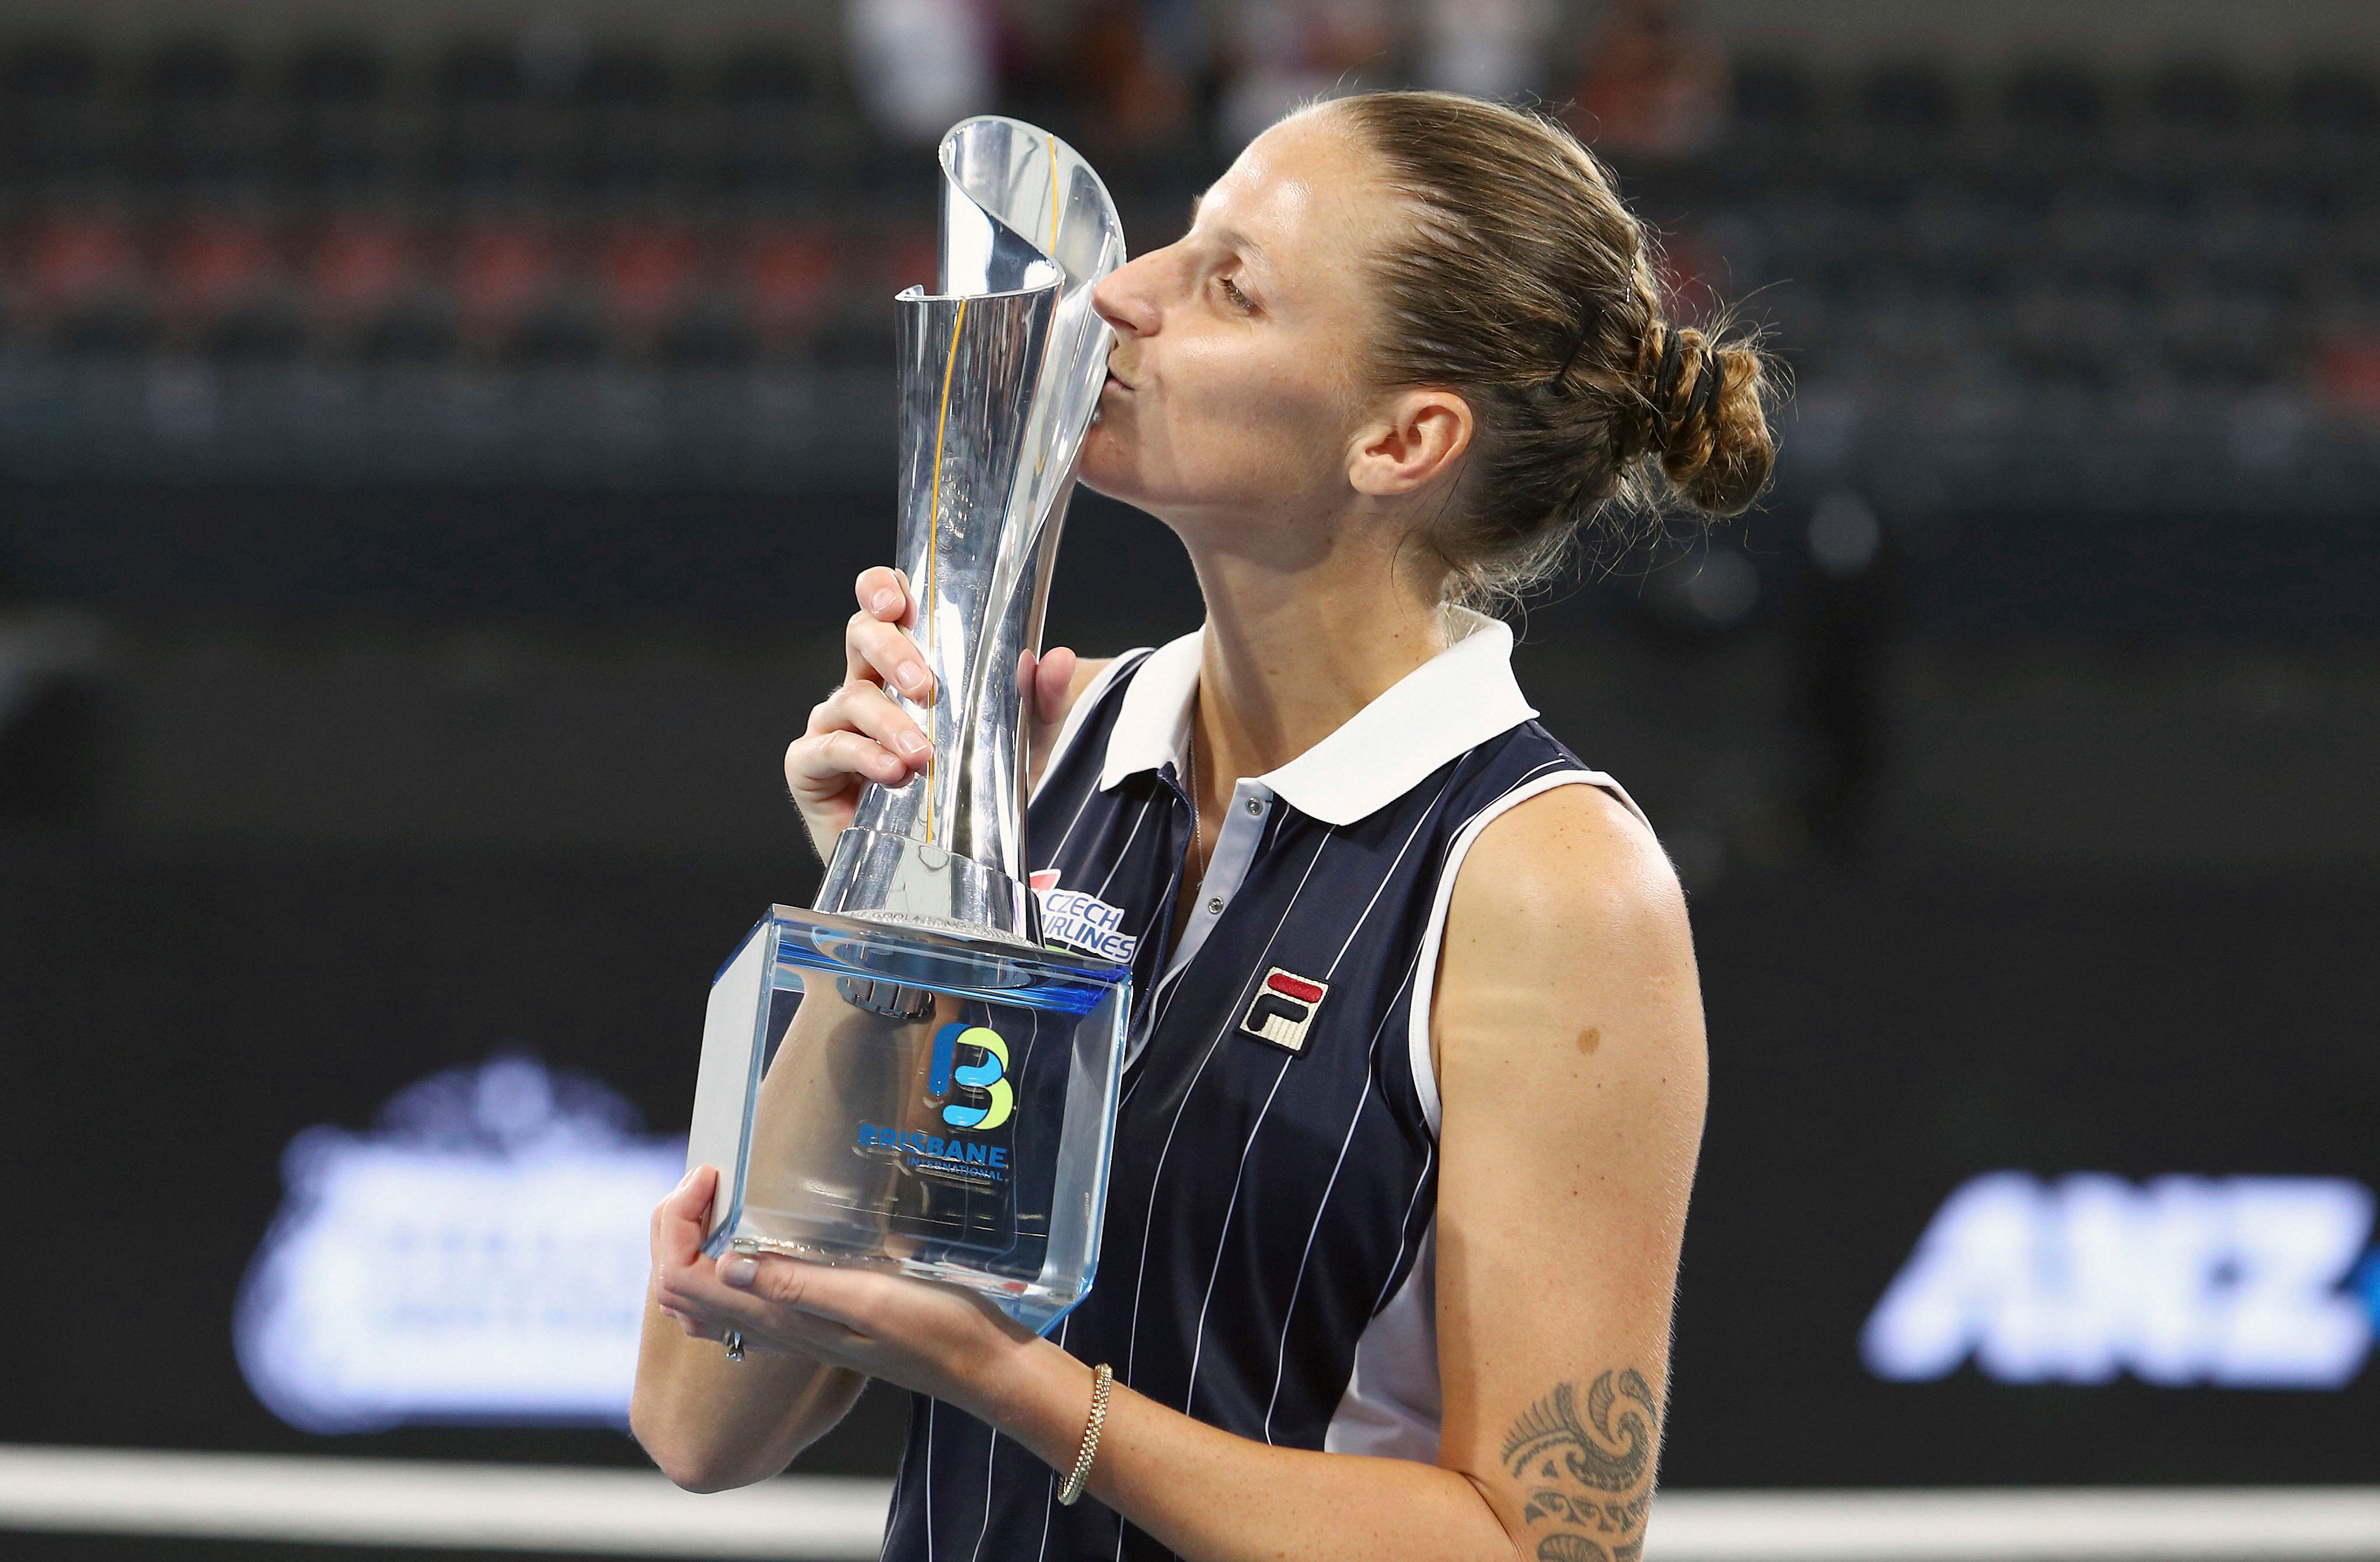 Karolina Pliskova of the Czech Republic poses with the trophy after she won her final match against Madison Keys of the United States 6-4, 4-6, 7-5, at the Brisbane International tennis tournament in Brisbane, Australia. (AP Photo)